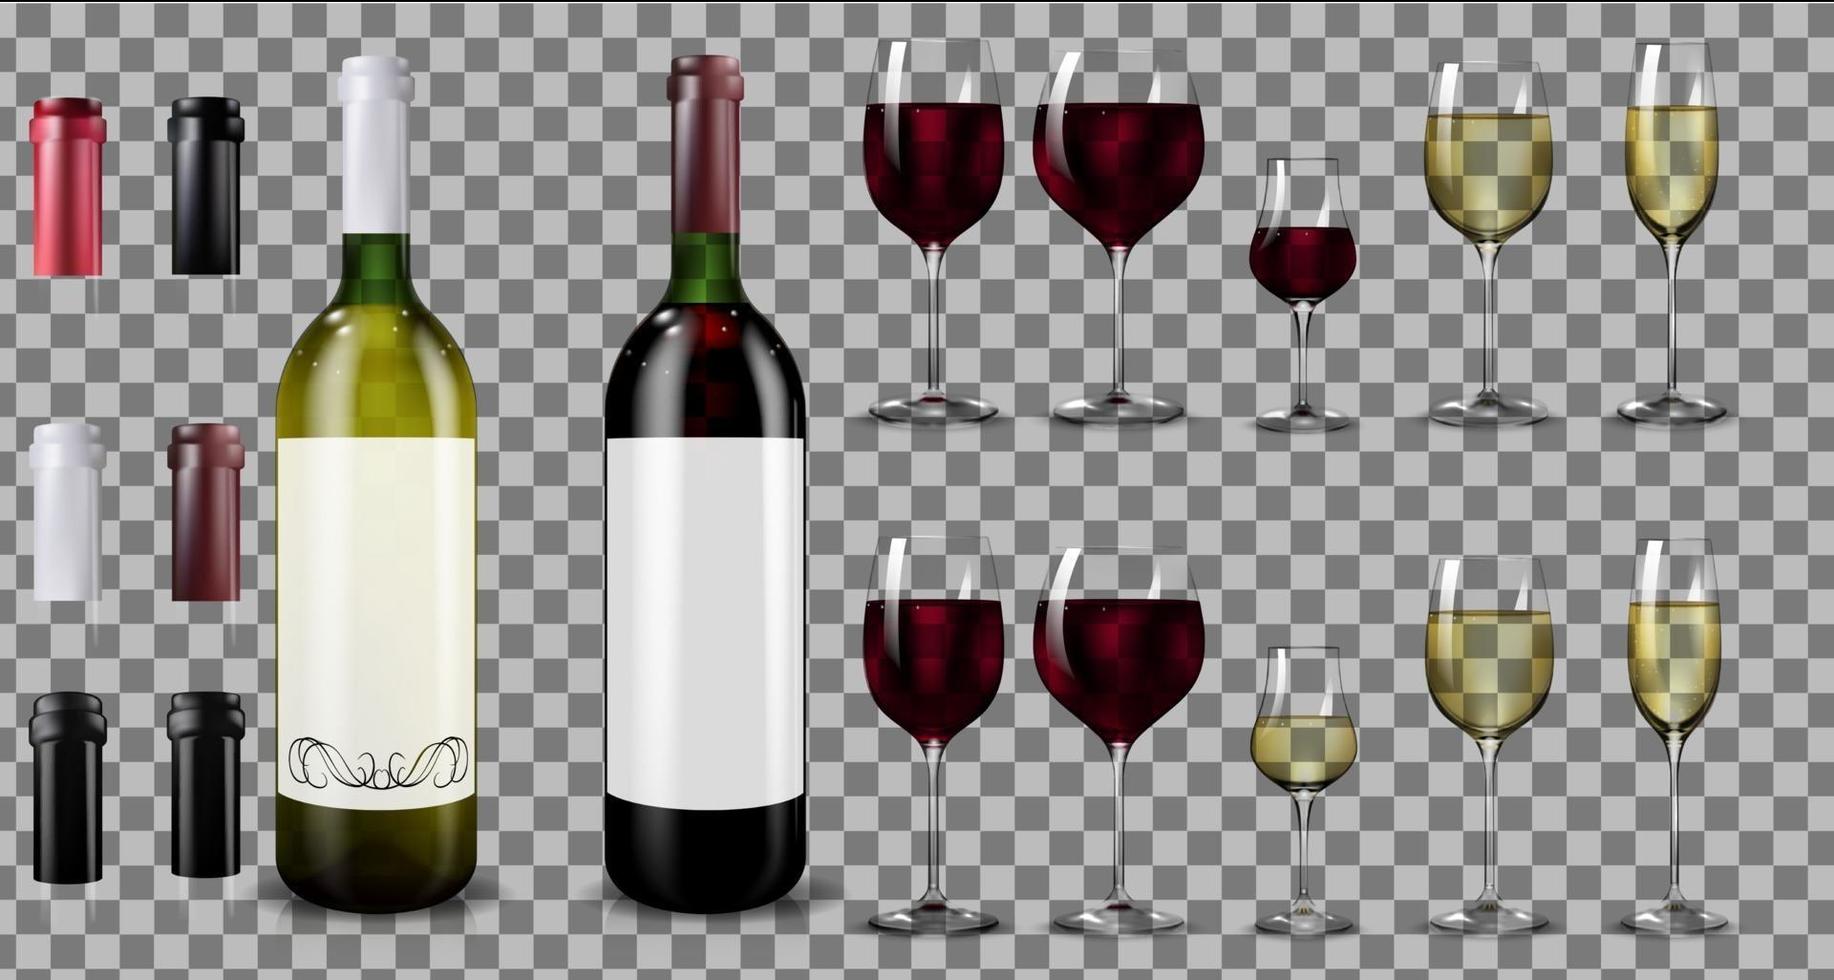 Red and white wine bottles and glasses. Realistic mockup vector